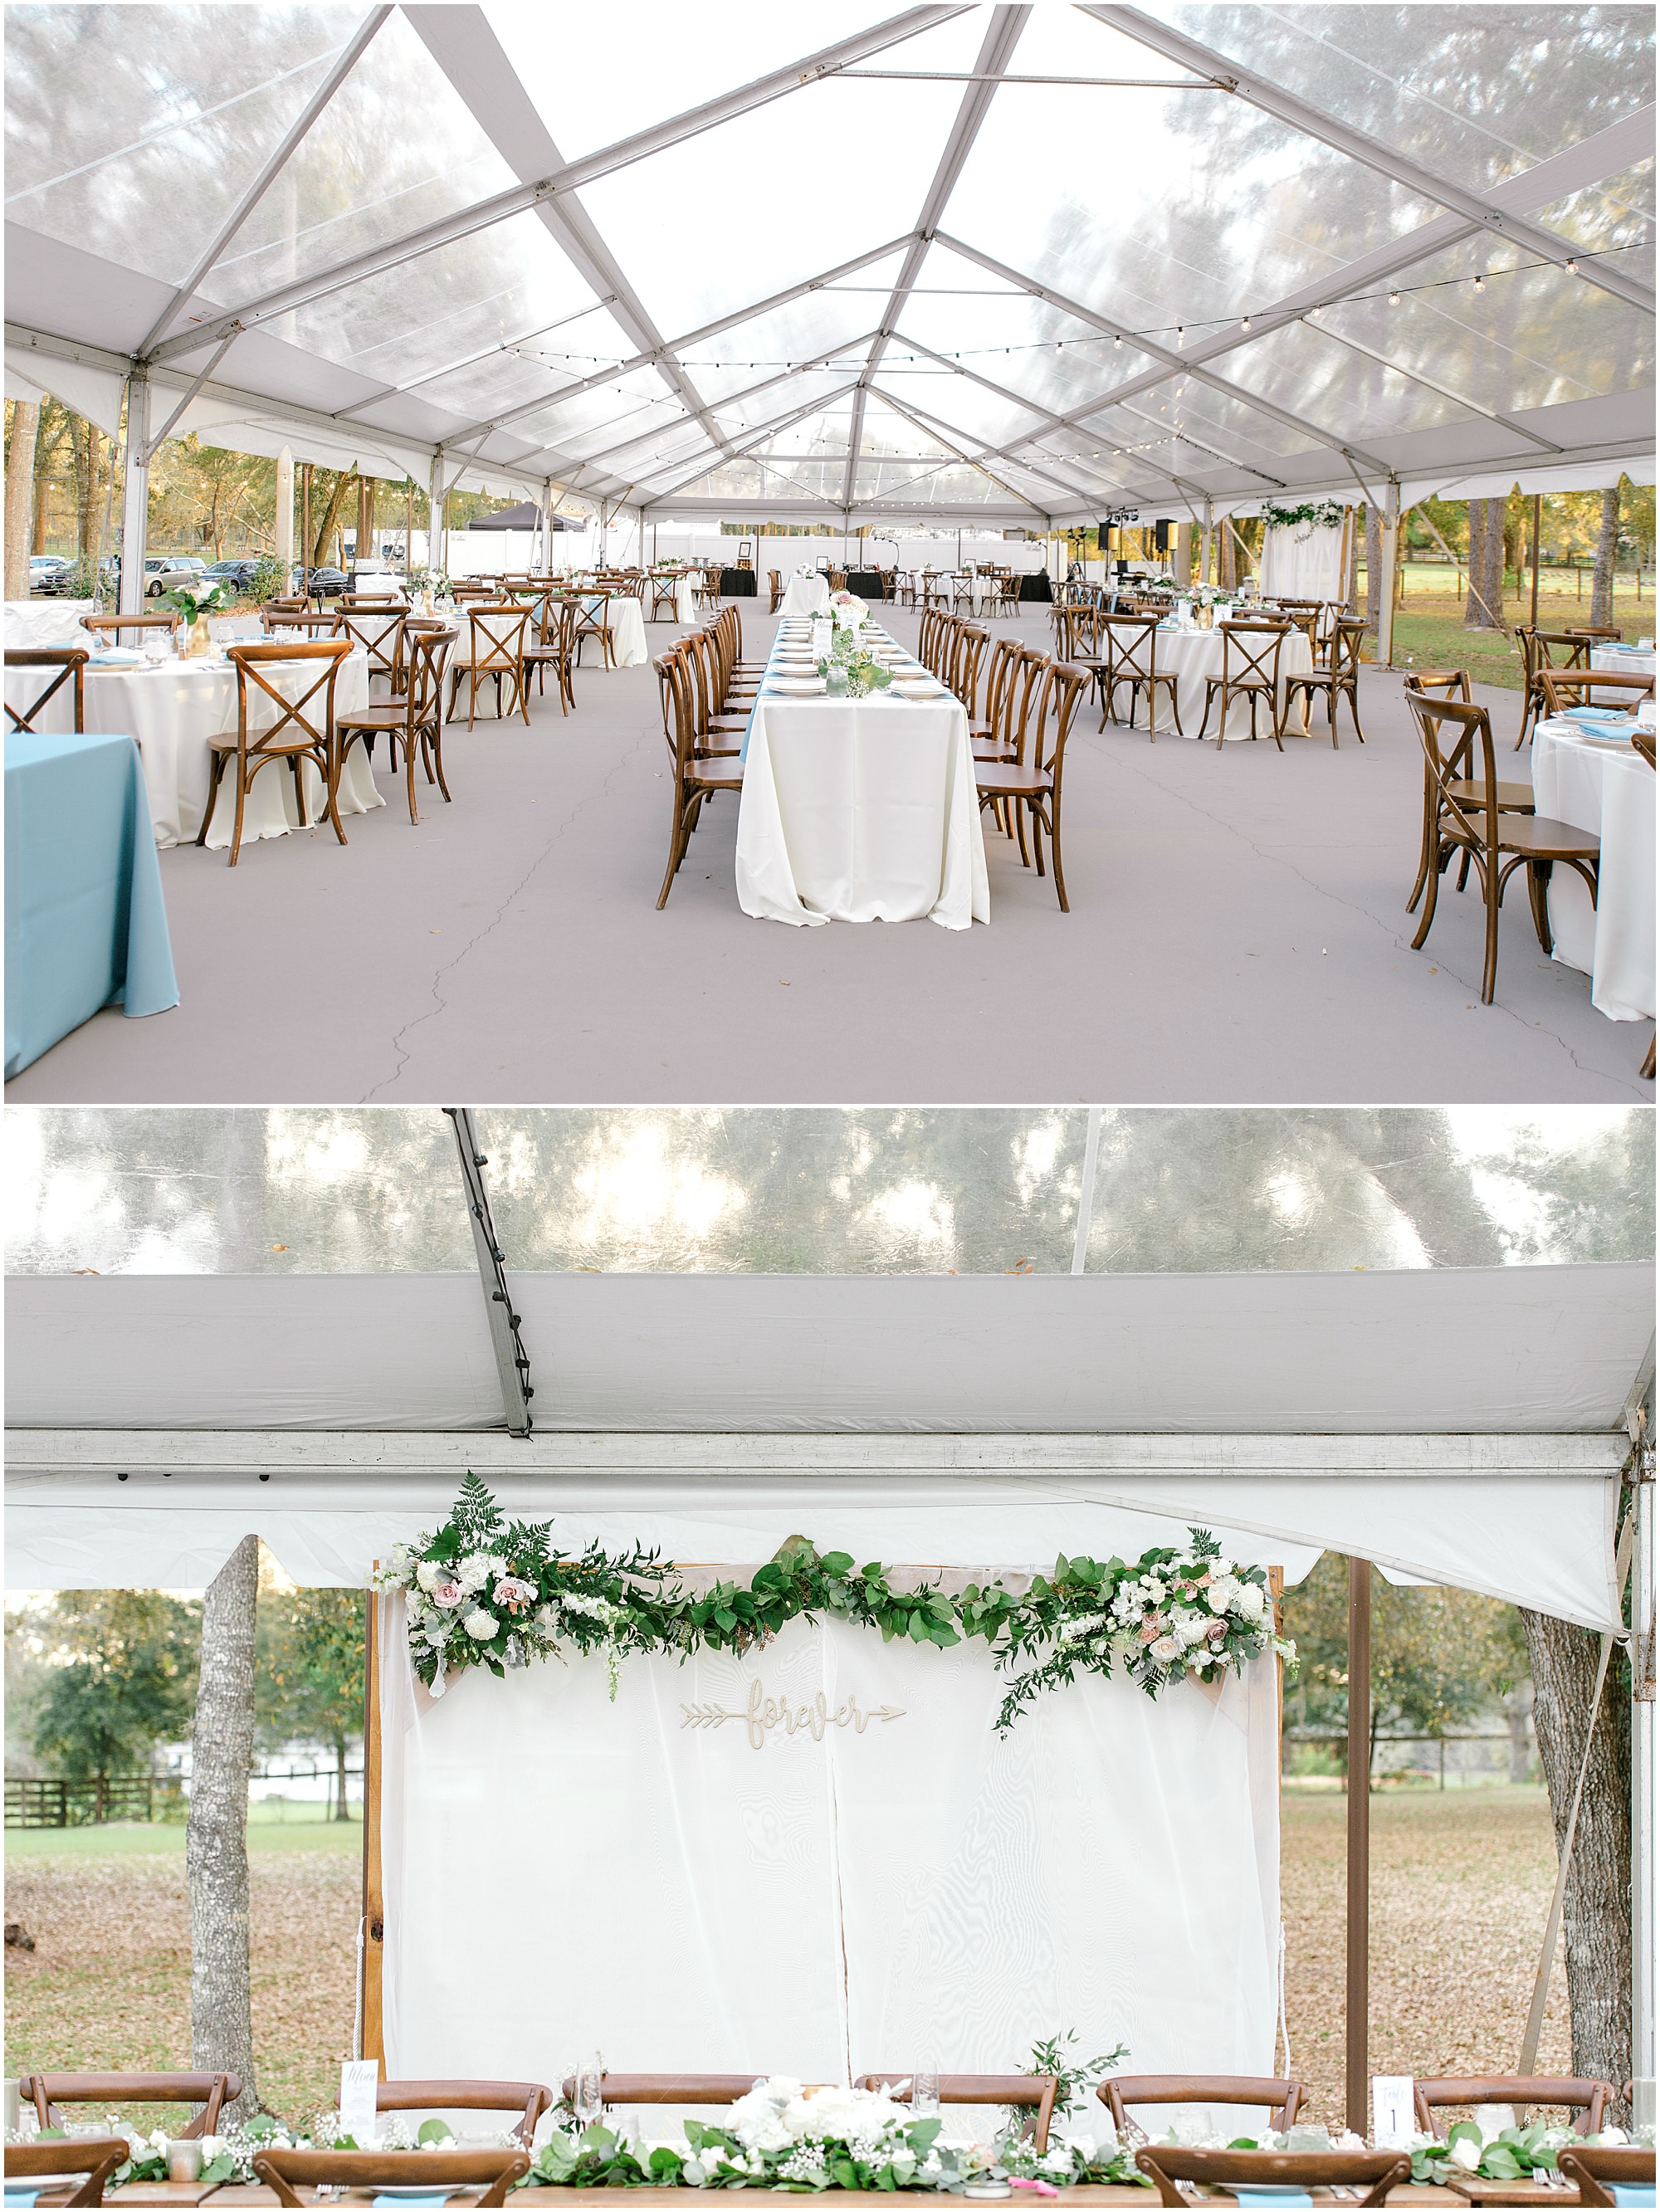 Outdoor reception under a clear tent